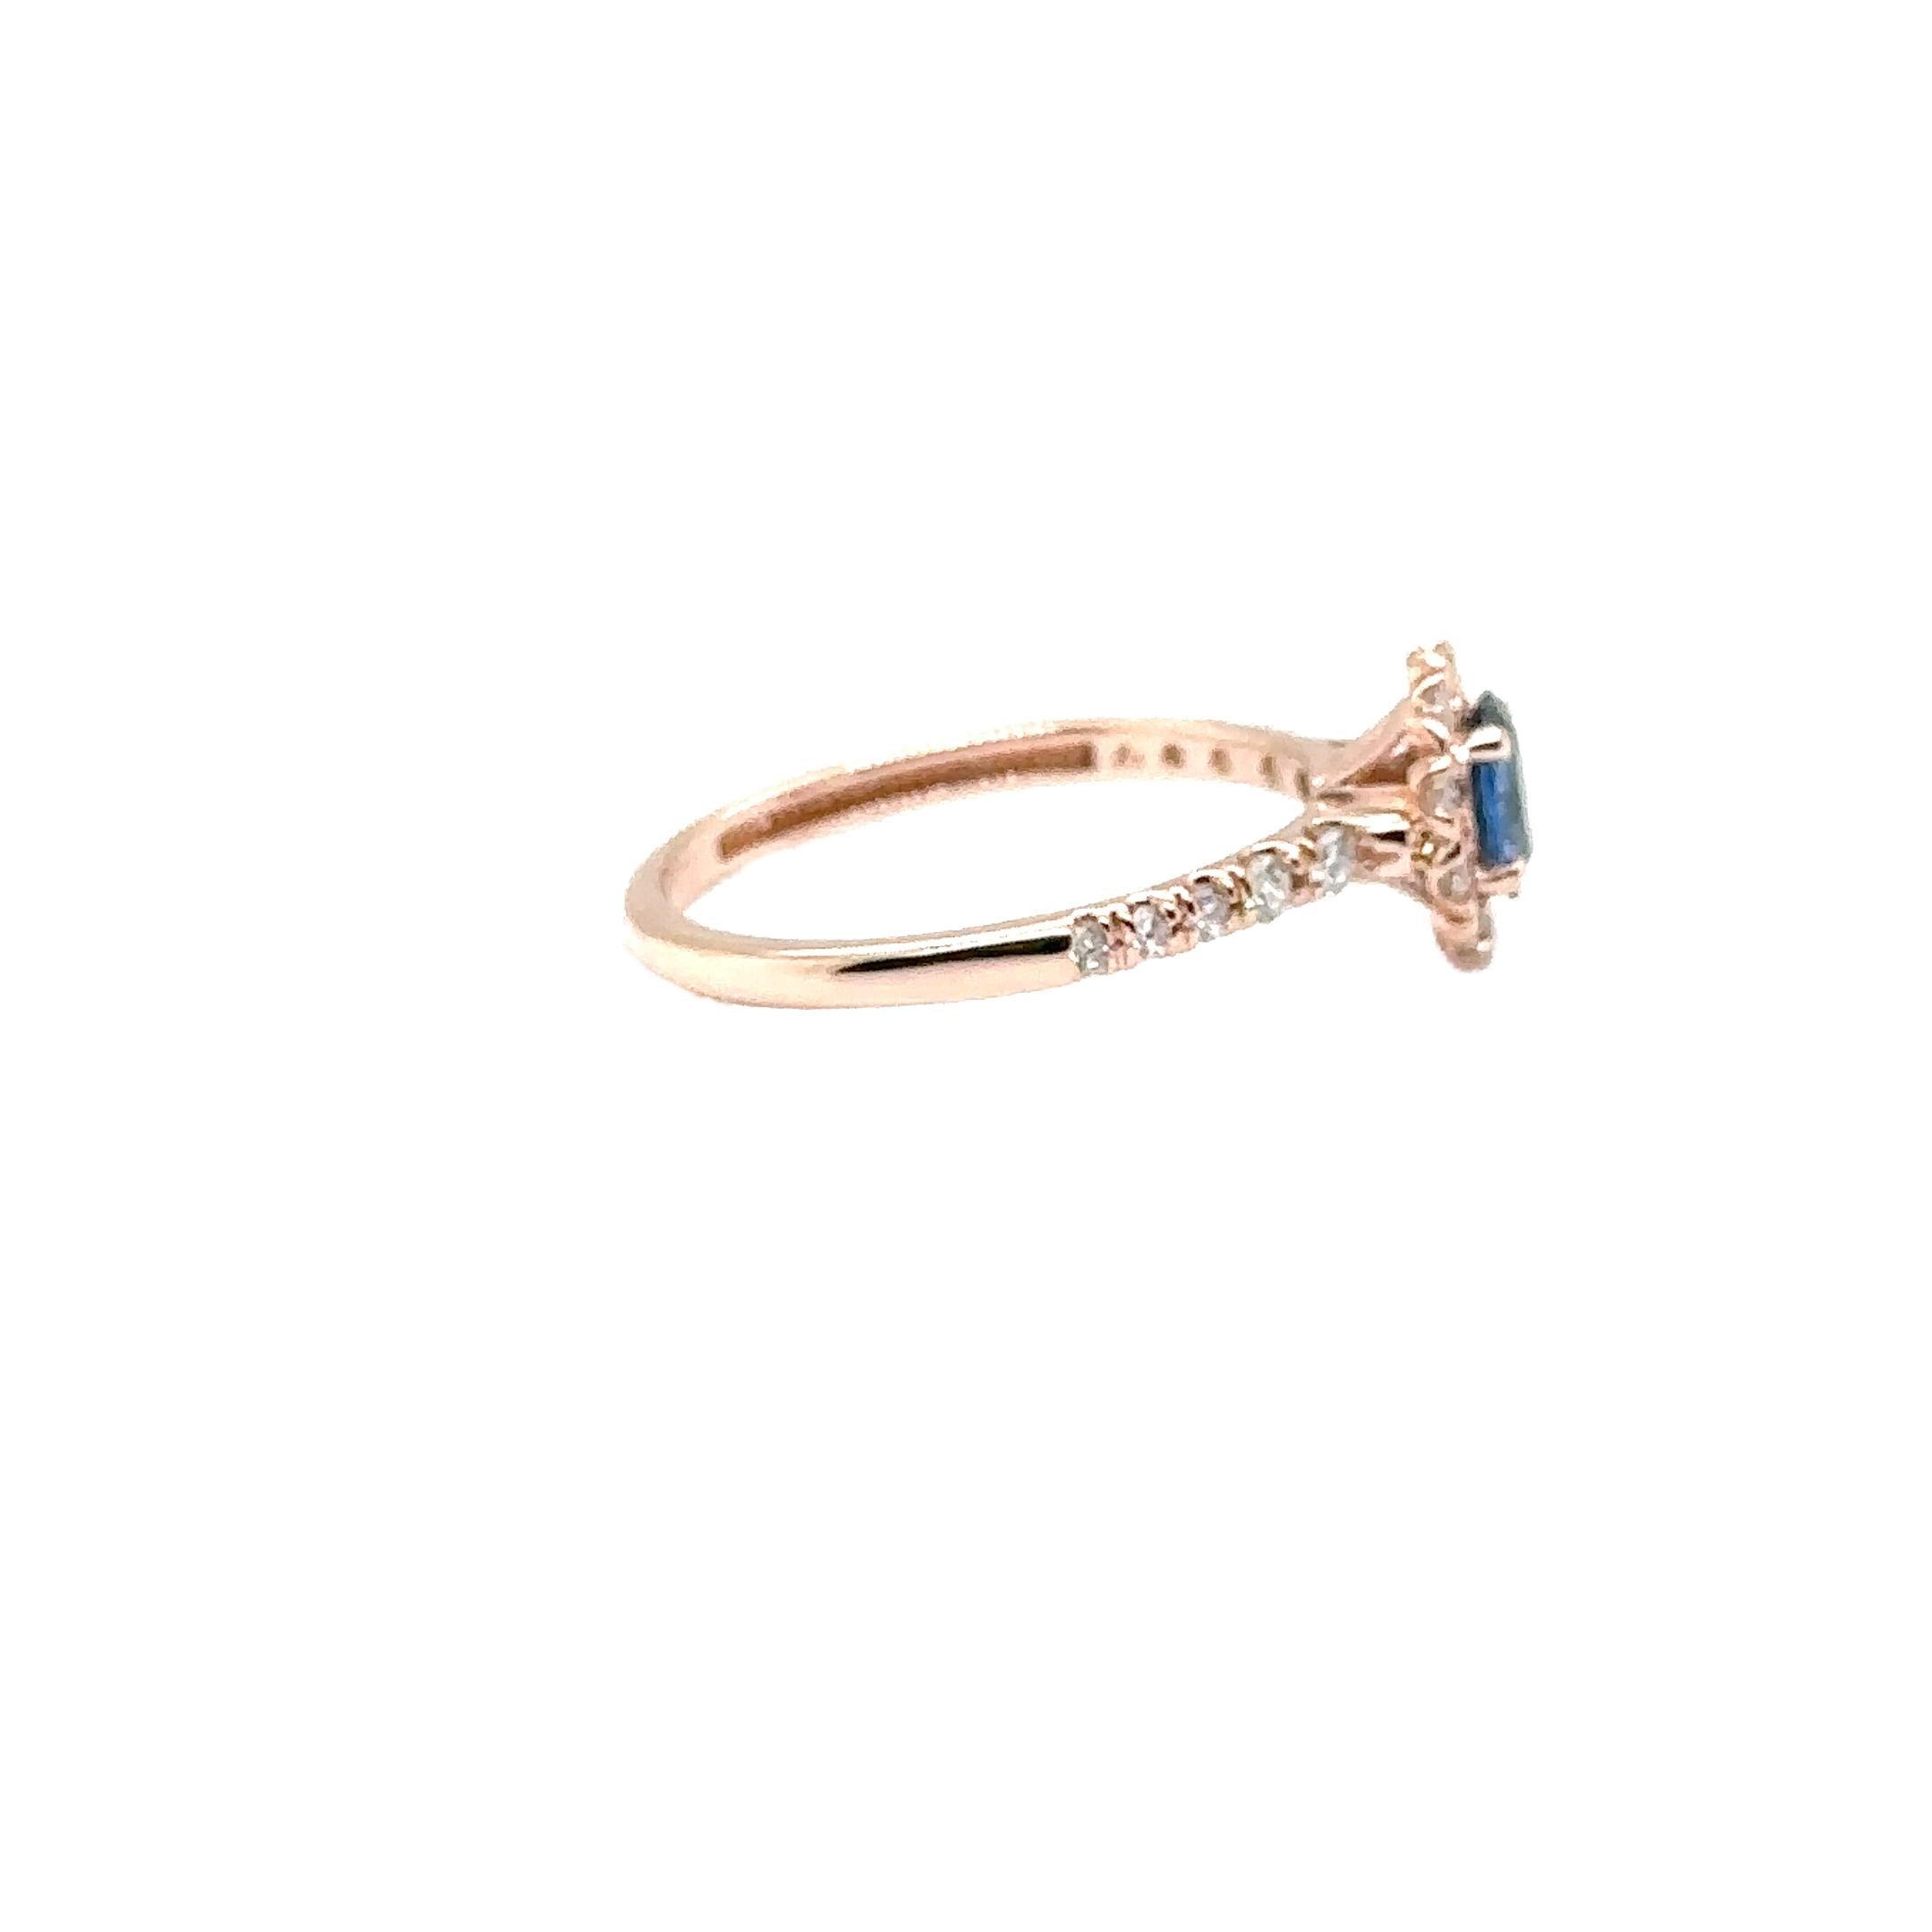 JAS-21-2235 - 14K ROSE GOLD OVAL SAPPHIRE RING with DIAMONDS For Sale 1